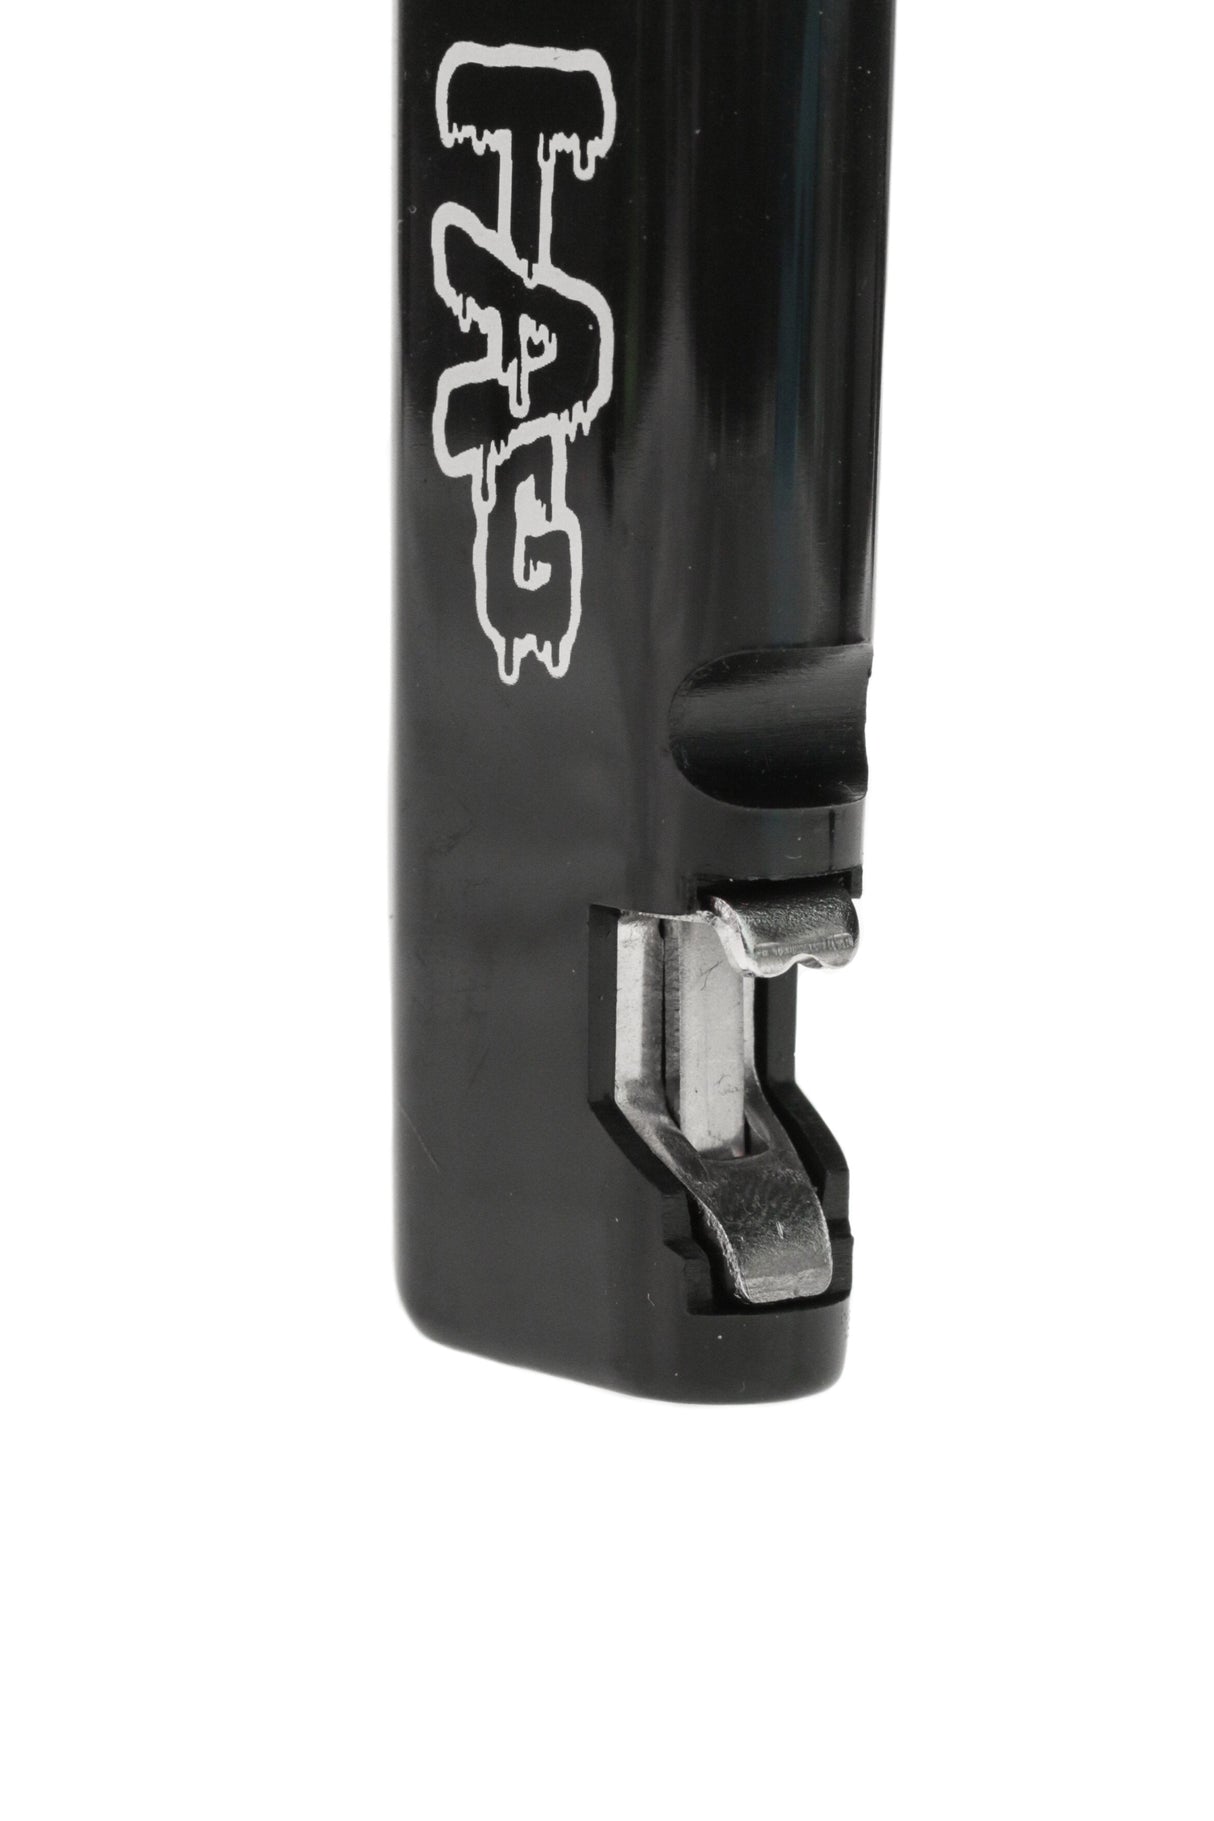 TAG - Touchlite Lighter with Built-in Bottle Opener, Close-up Side View